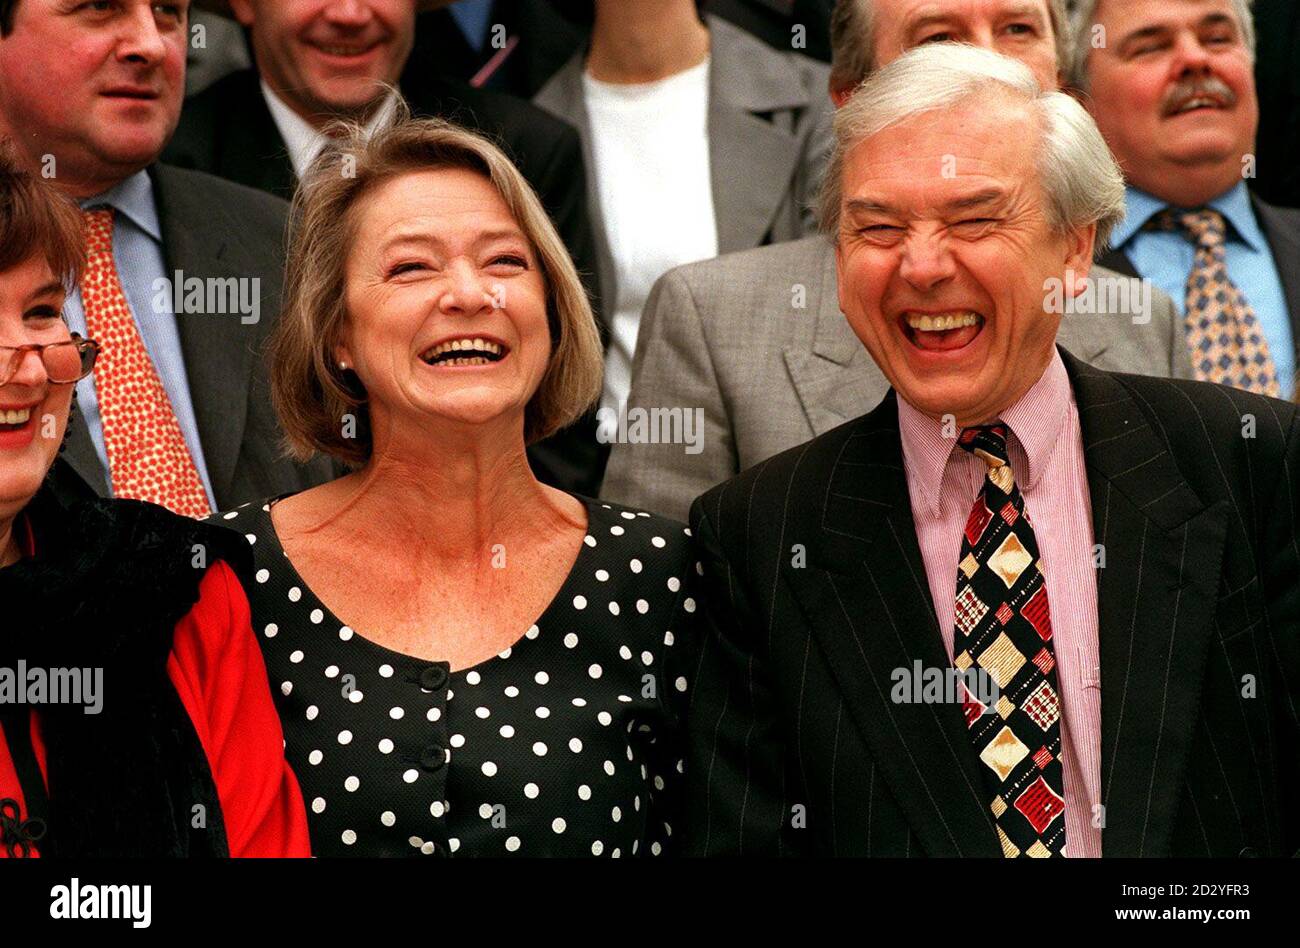 JOHN HUMPHRYS AND KATE ADIE AT A PHOTOCALL IN LONDON FOR THE LAUNCH OF THE  NEW BBC RADIO 4 SCHEDULE. 02/06/00: Humphrys becomes a father again at the  age of 56, after